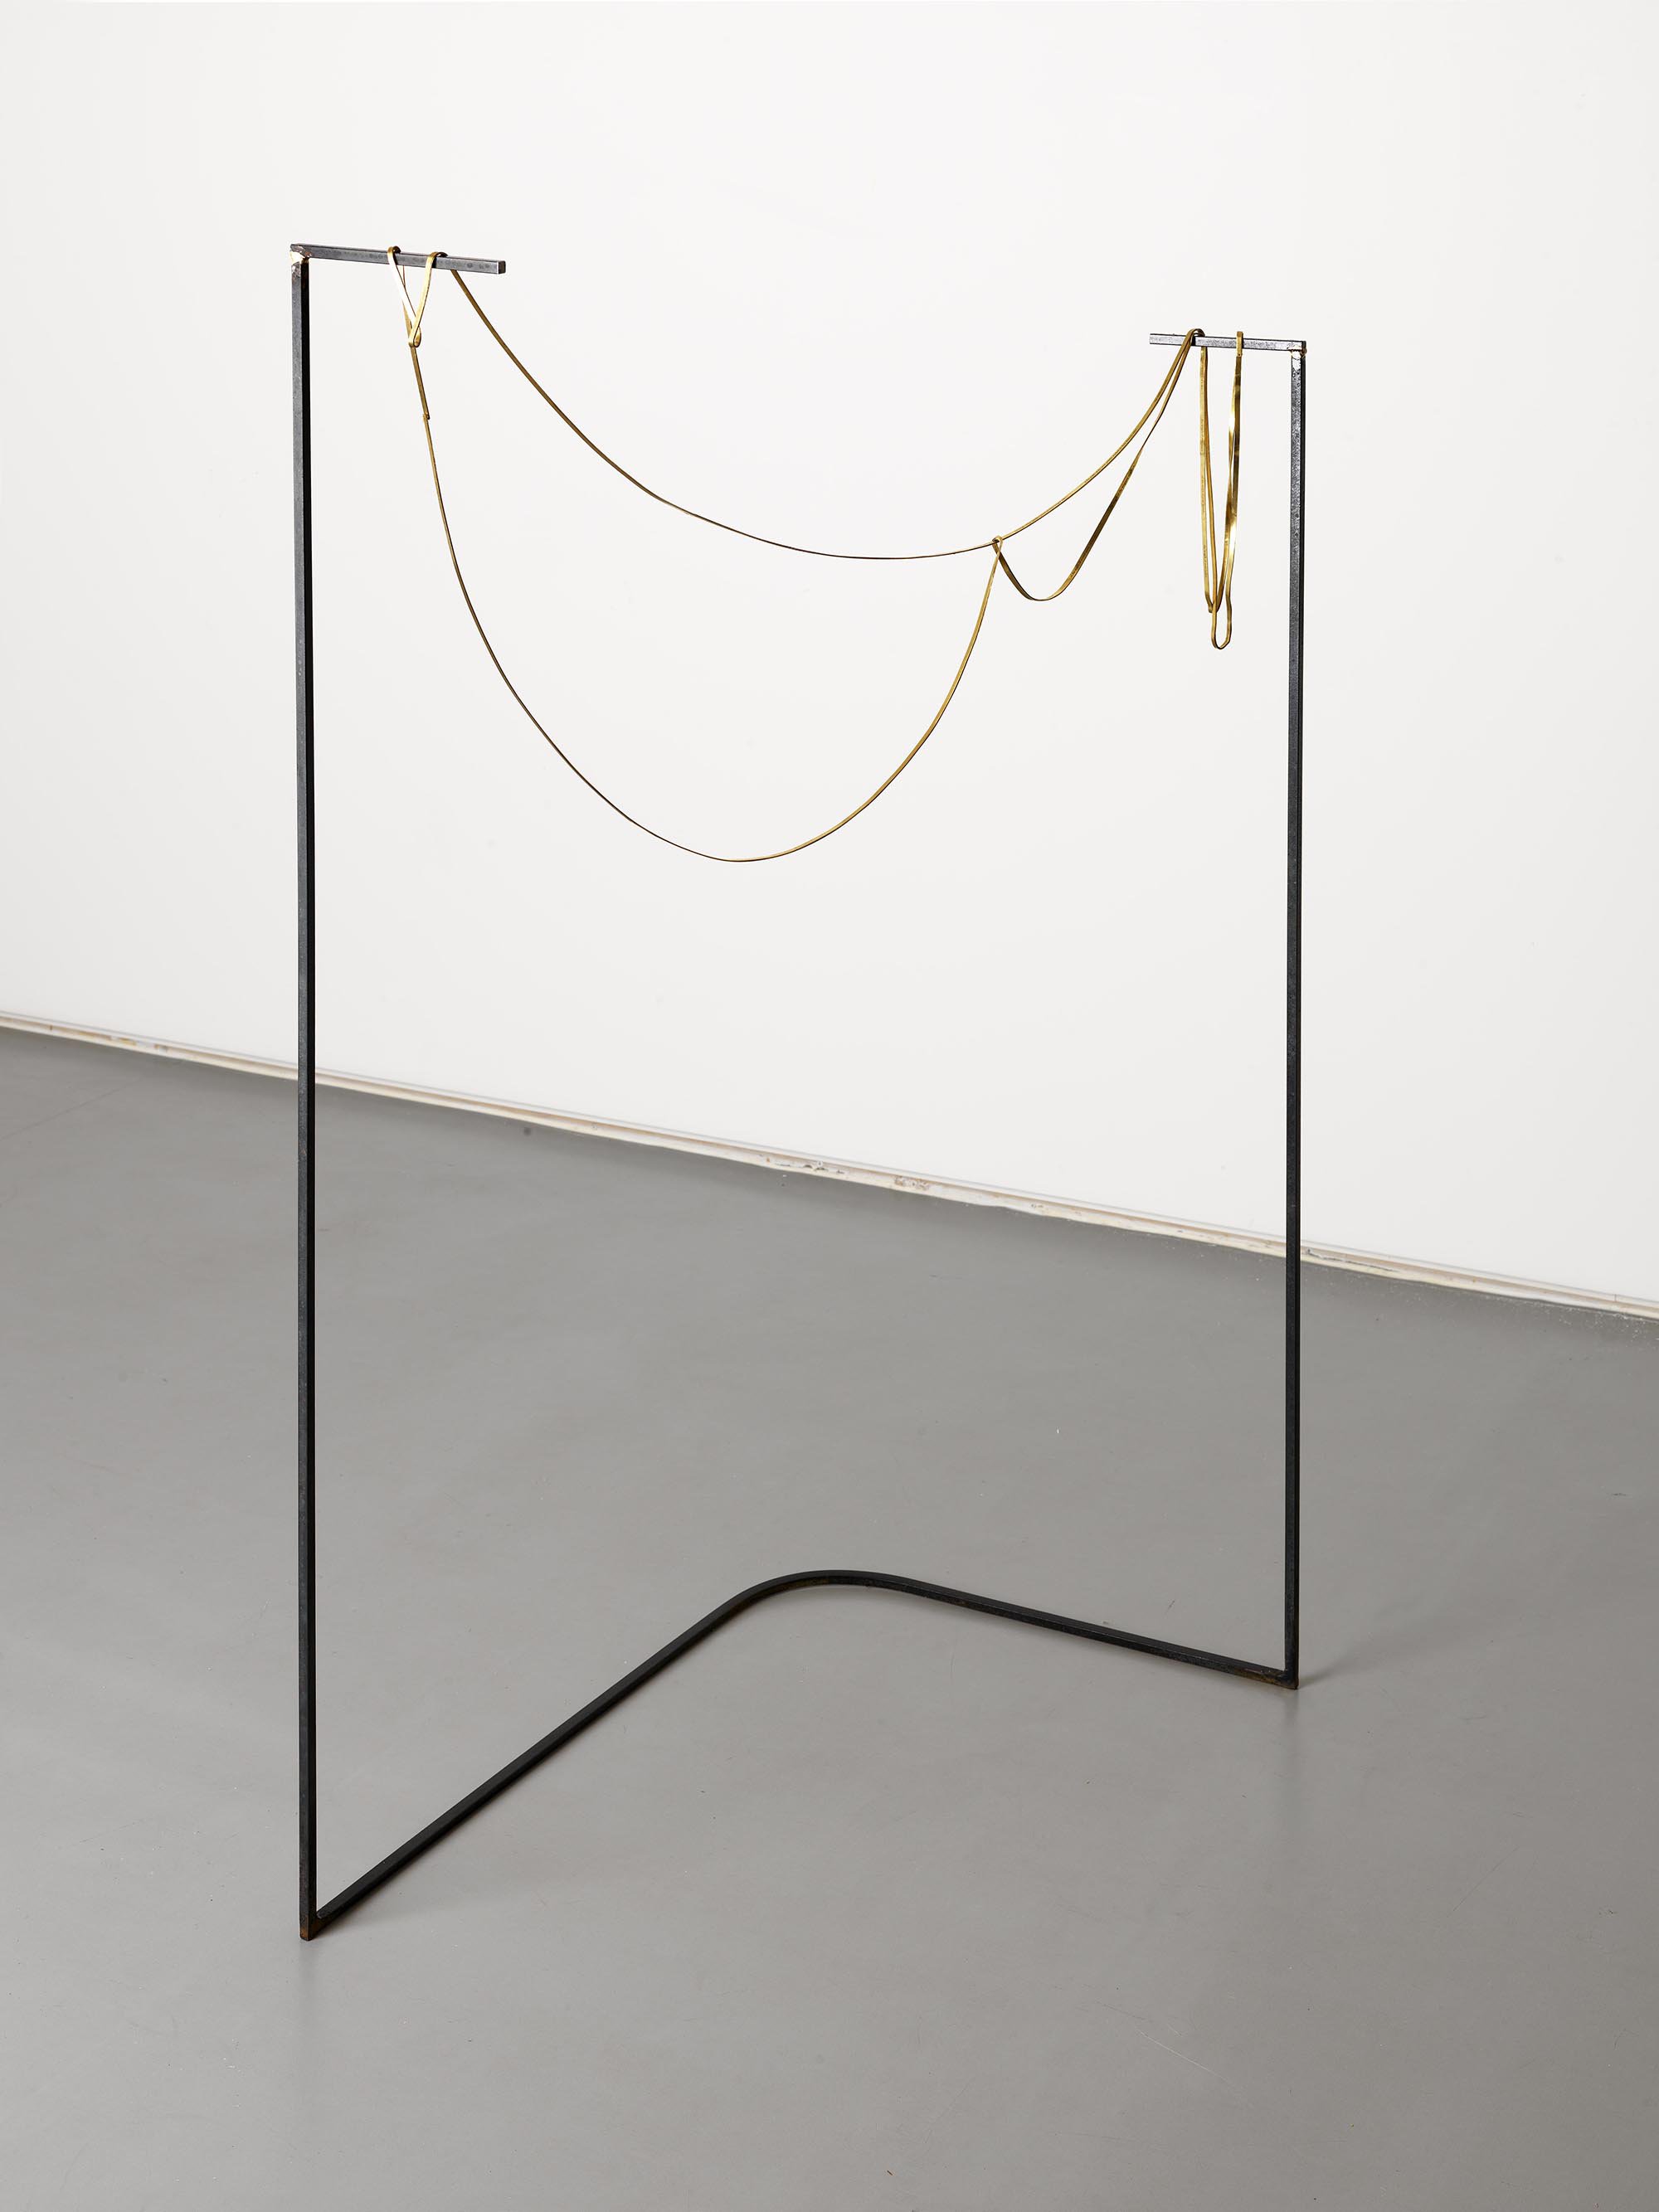 Athanasios Argianas, Song Machine, photo-etched brass strip of the length of the artist’s height, mild steel, walnut, 100 x 160 cm, 2010. Installation view, Odd Time Beat, Rodeo, Istanbul, 2011